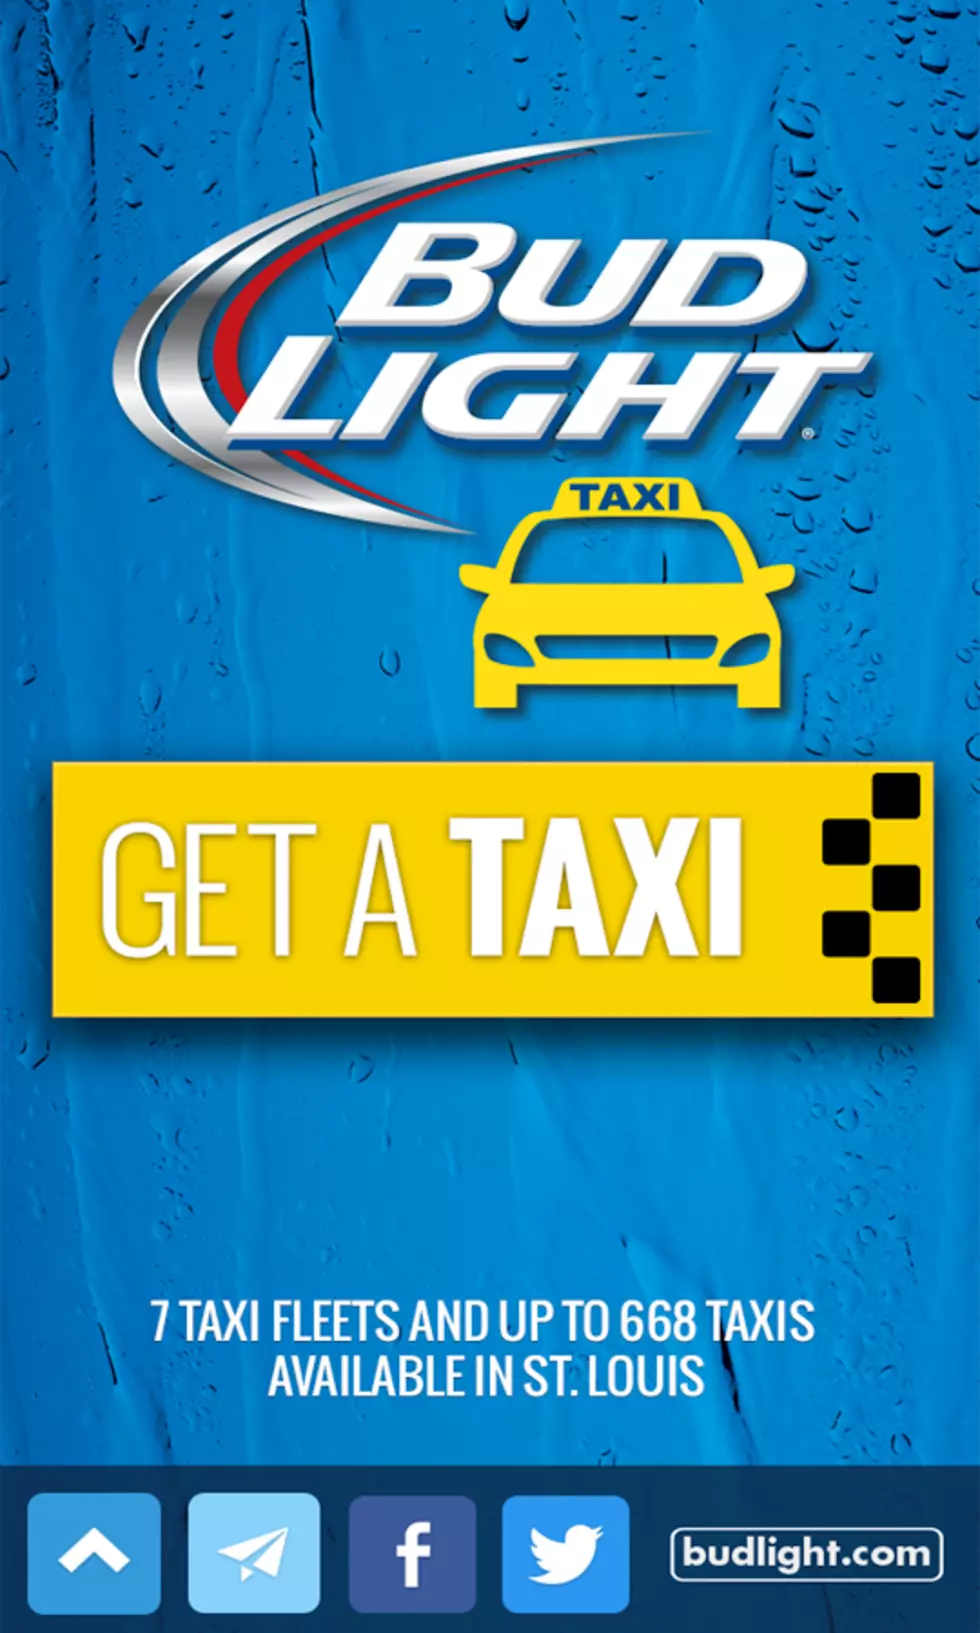 Get Home Safe During The Holidays By Using The Bud Light Taxi App